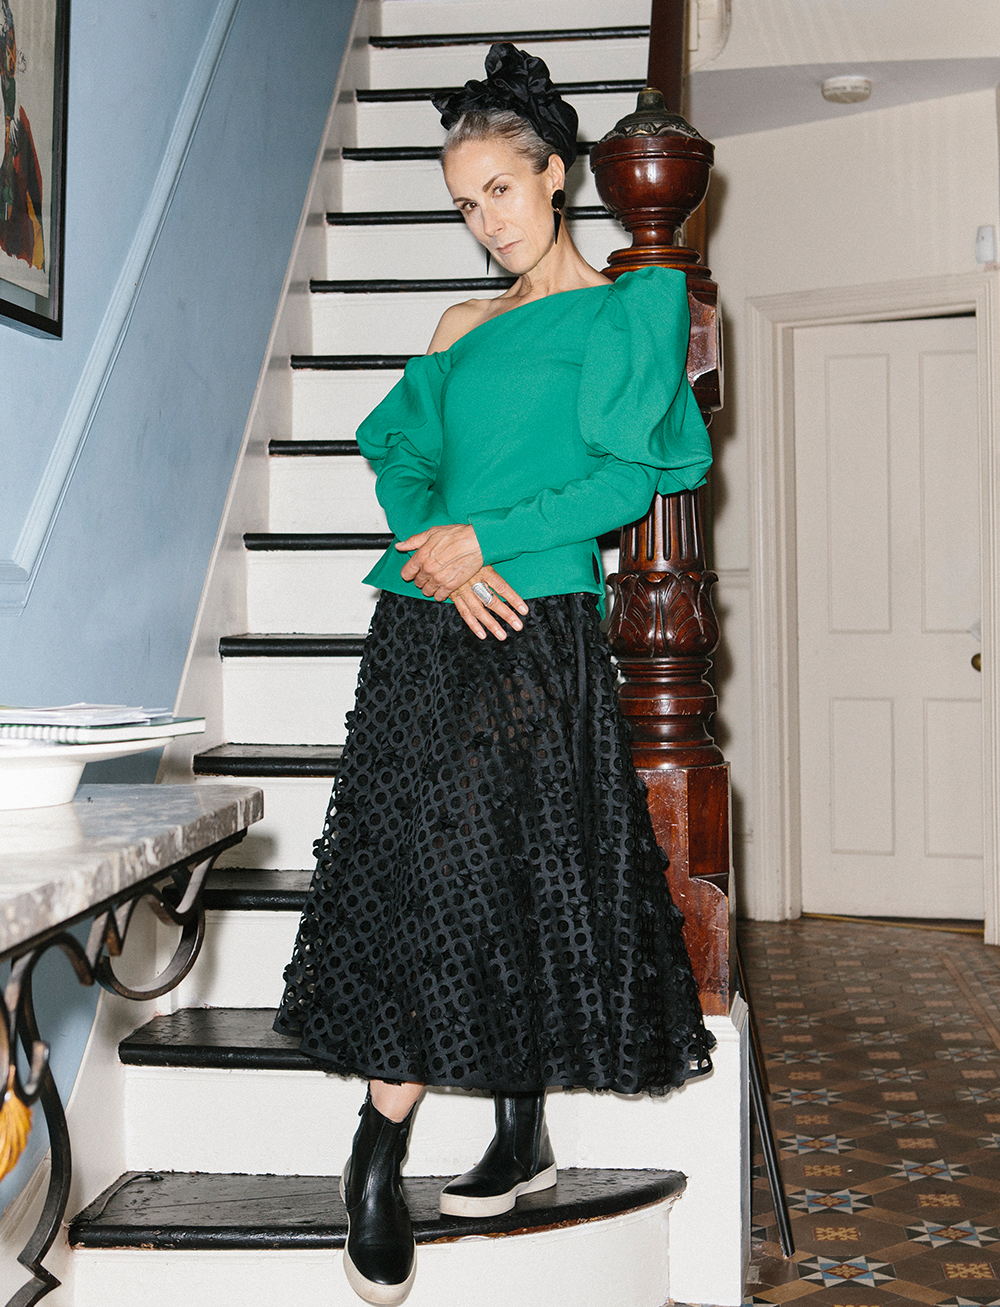 over 50 fashion and clothing inspiration: Caryn Franklin wearing a green puffy-sleeved Osman top with a black skirt and sneakers